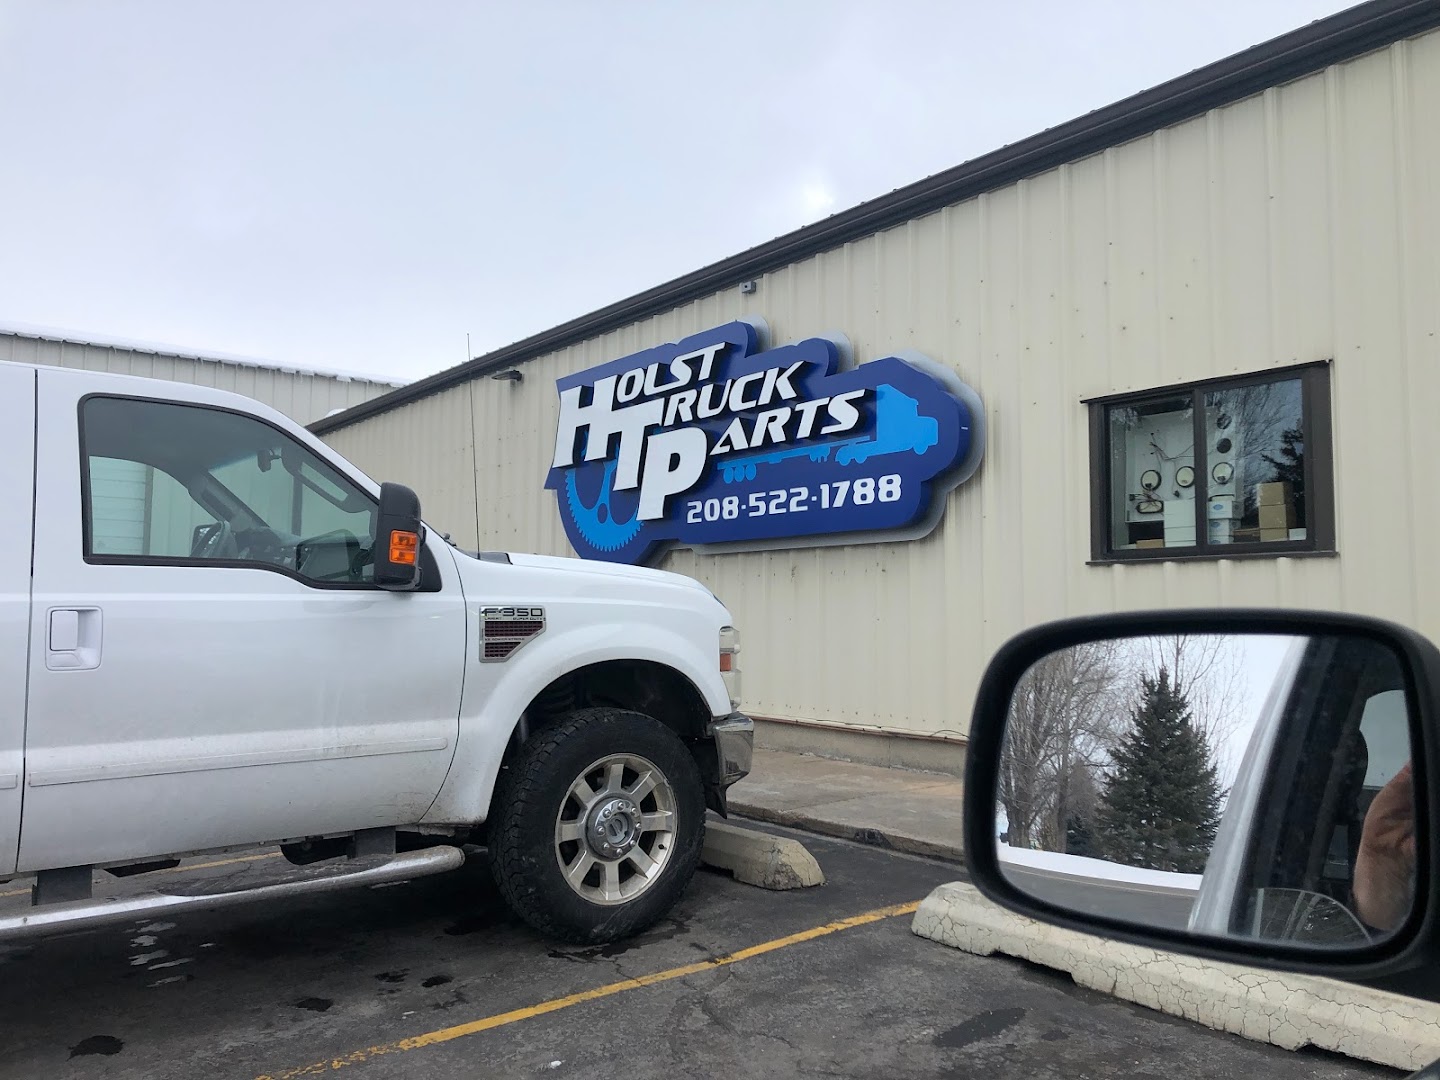 Truck accessories store In Ucon ID 